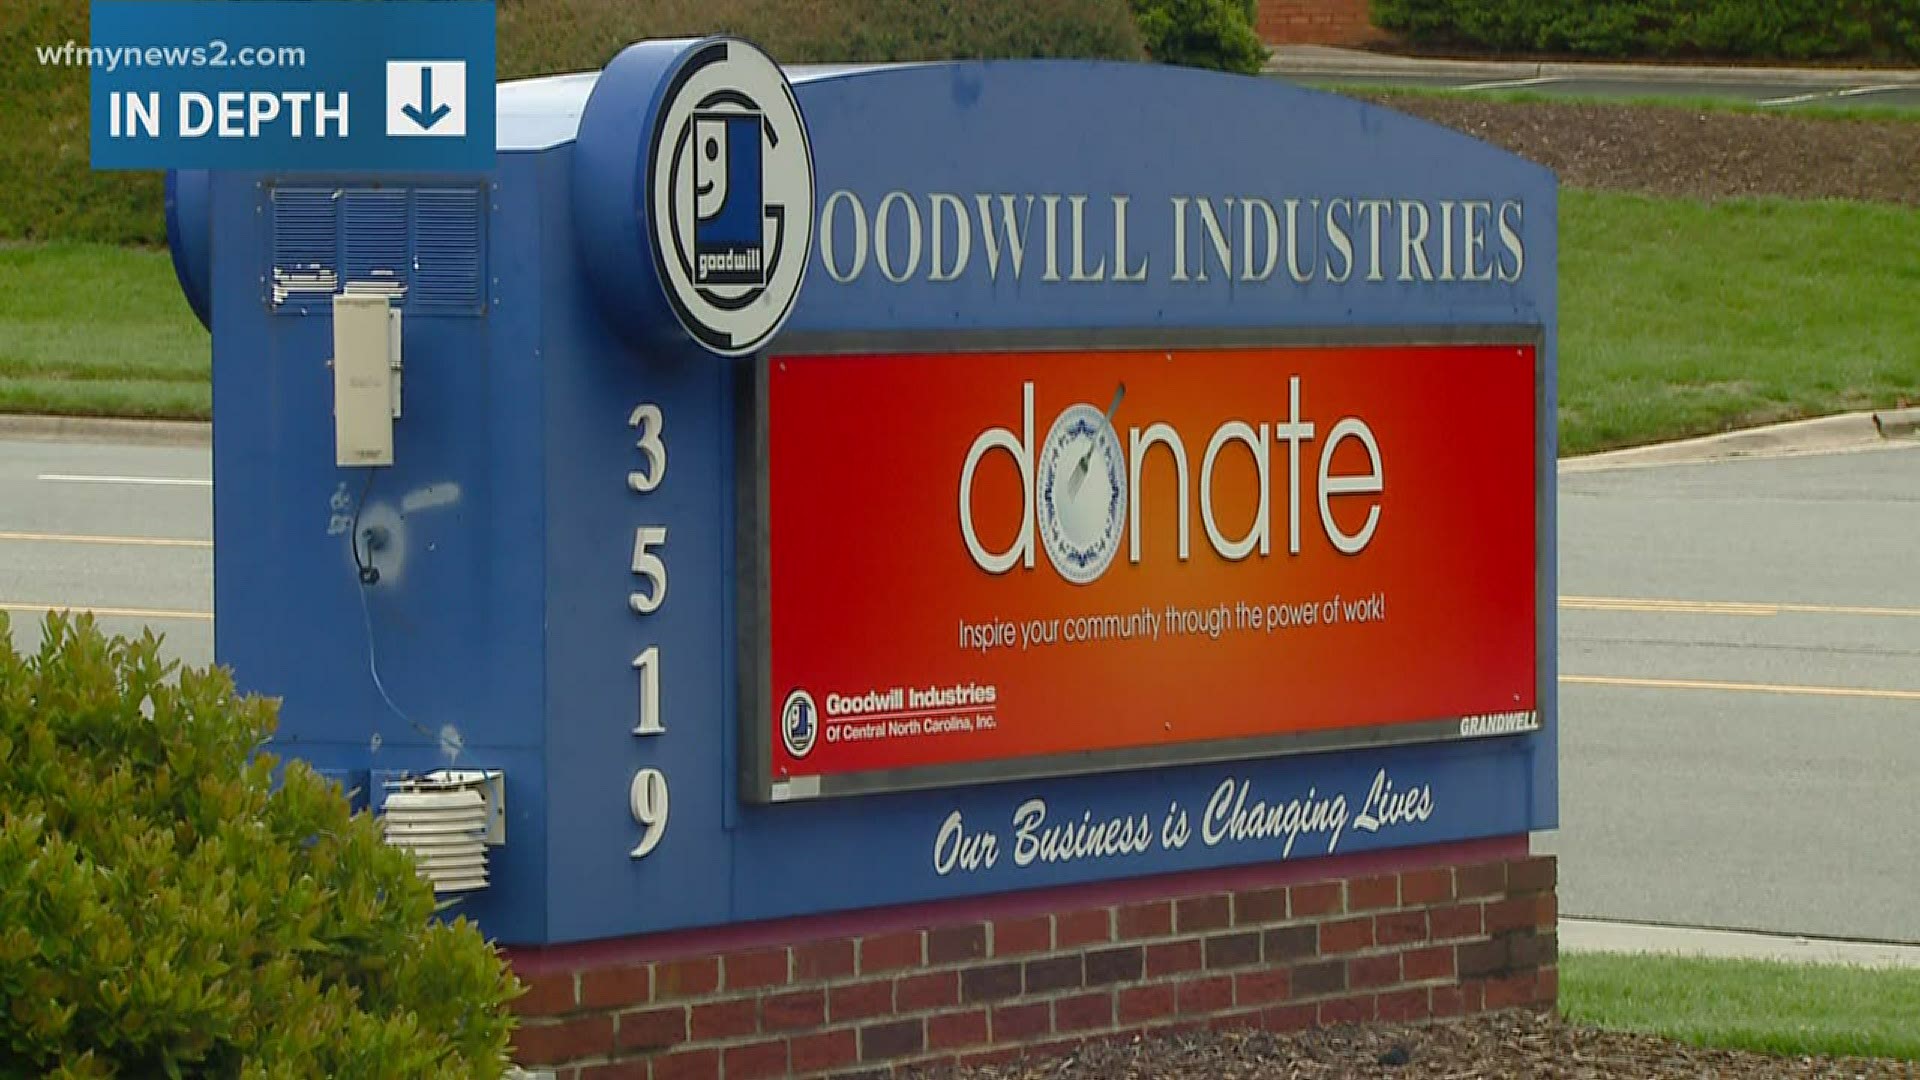 Goodwill leaders say the only way they can continue to provide services is by selling items through their retail stores.